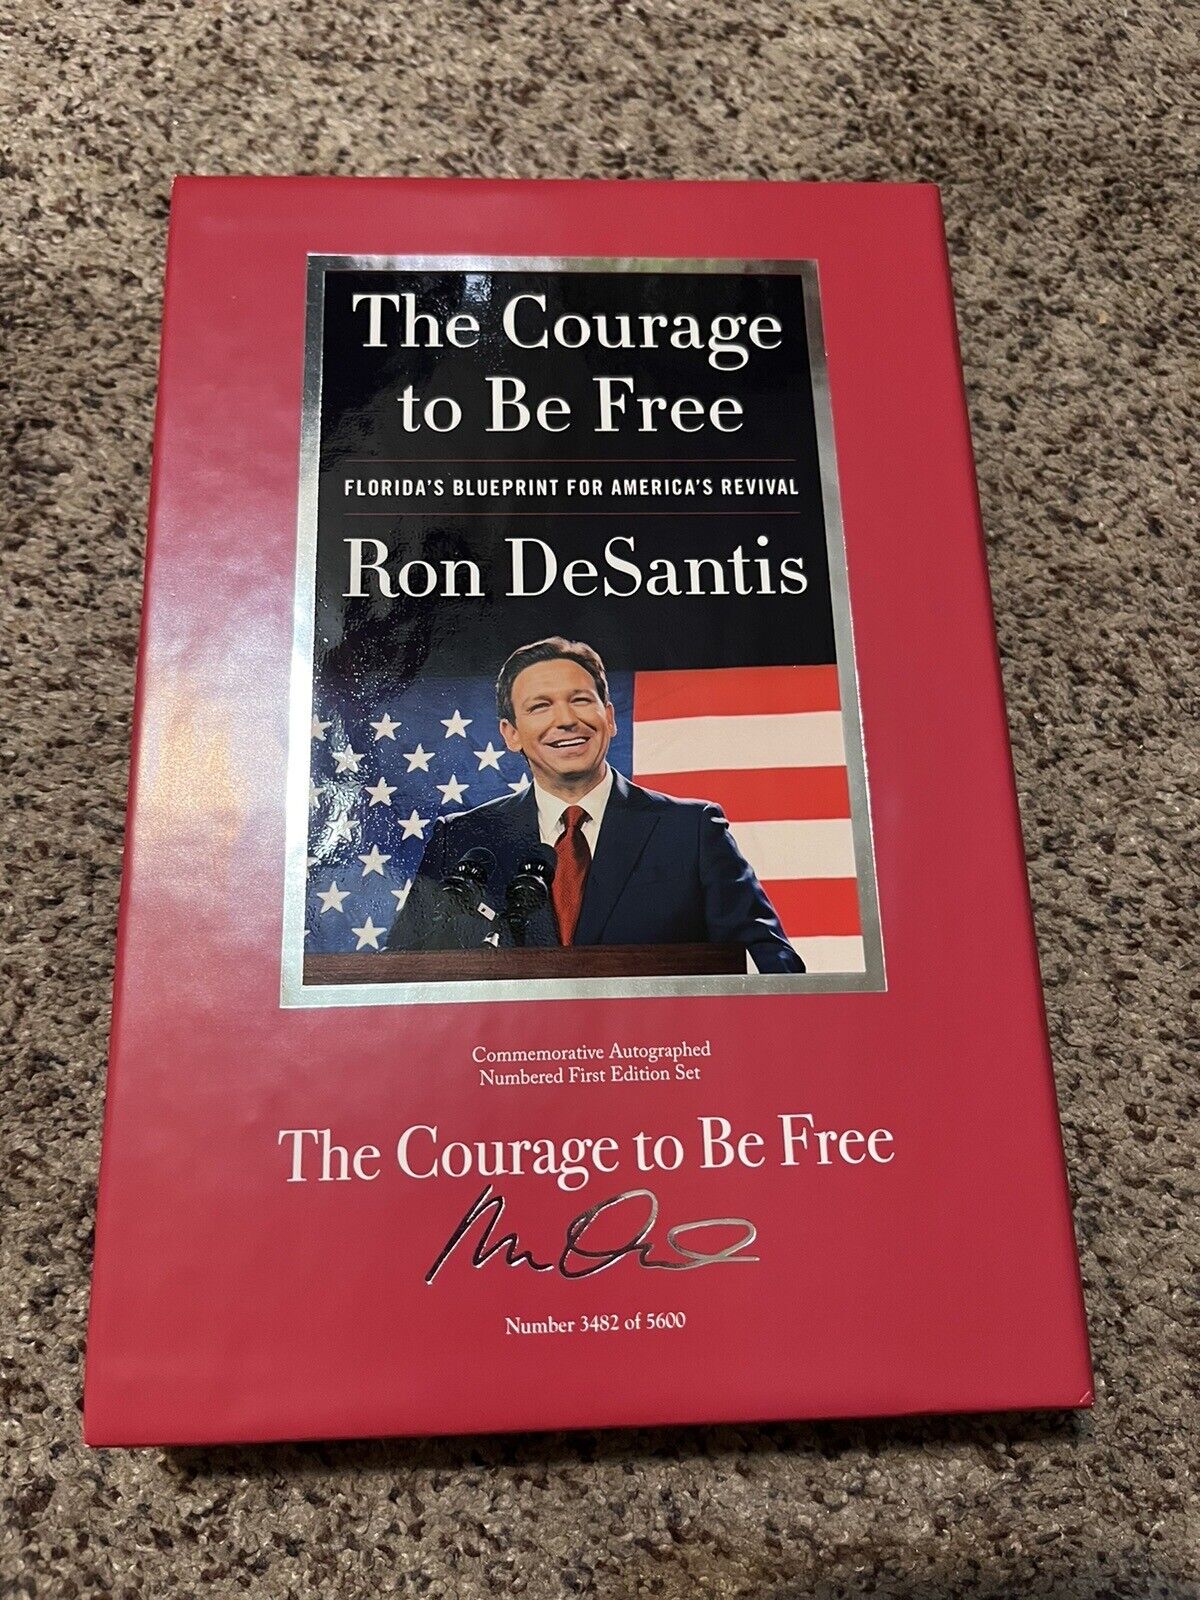 GOV. RON DESANTIS AUTOGRAPHED THE COURAGE TO BE FREE BOOK 3482